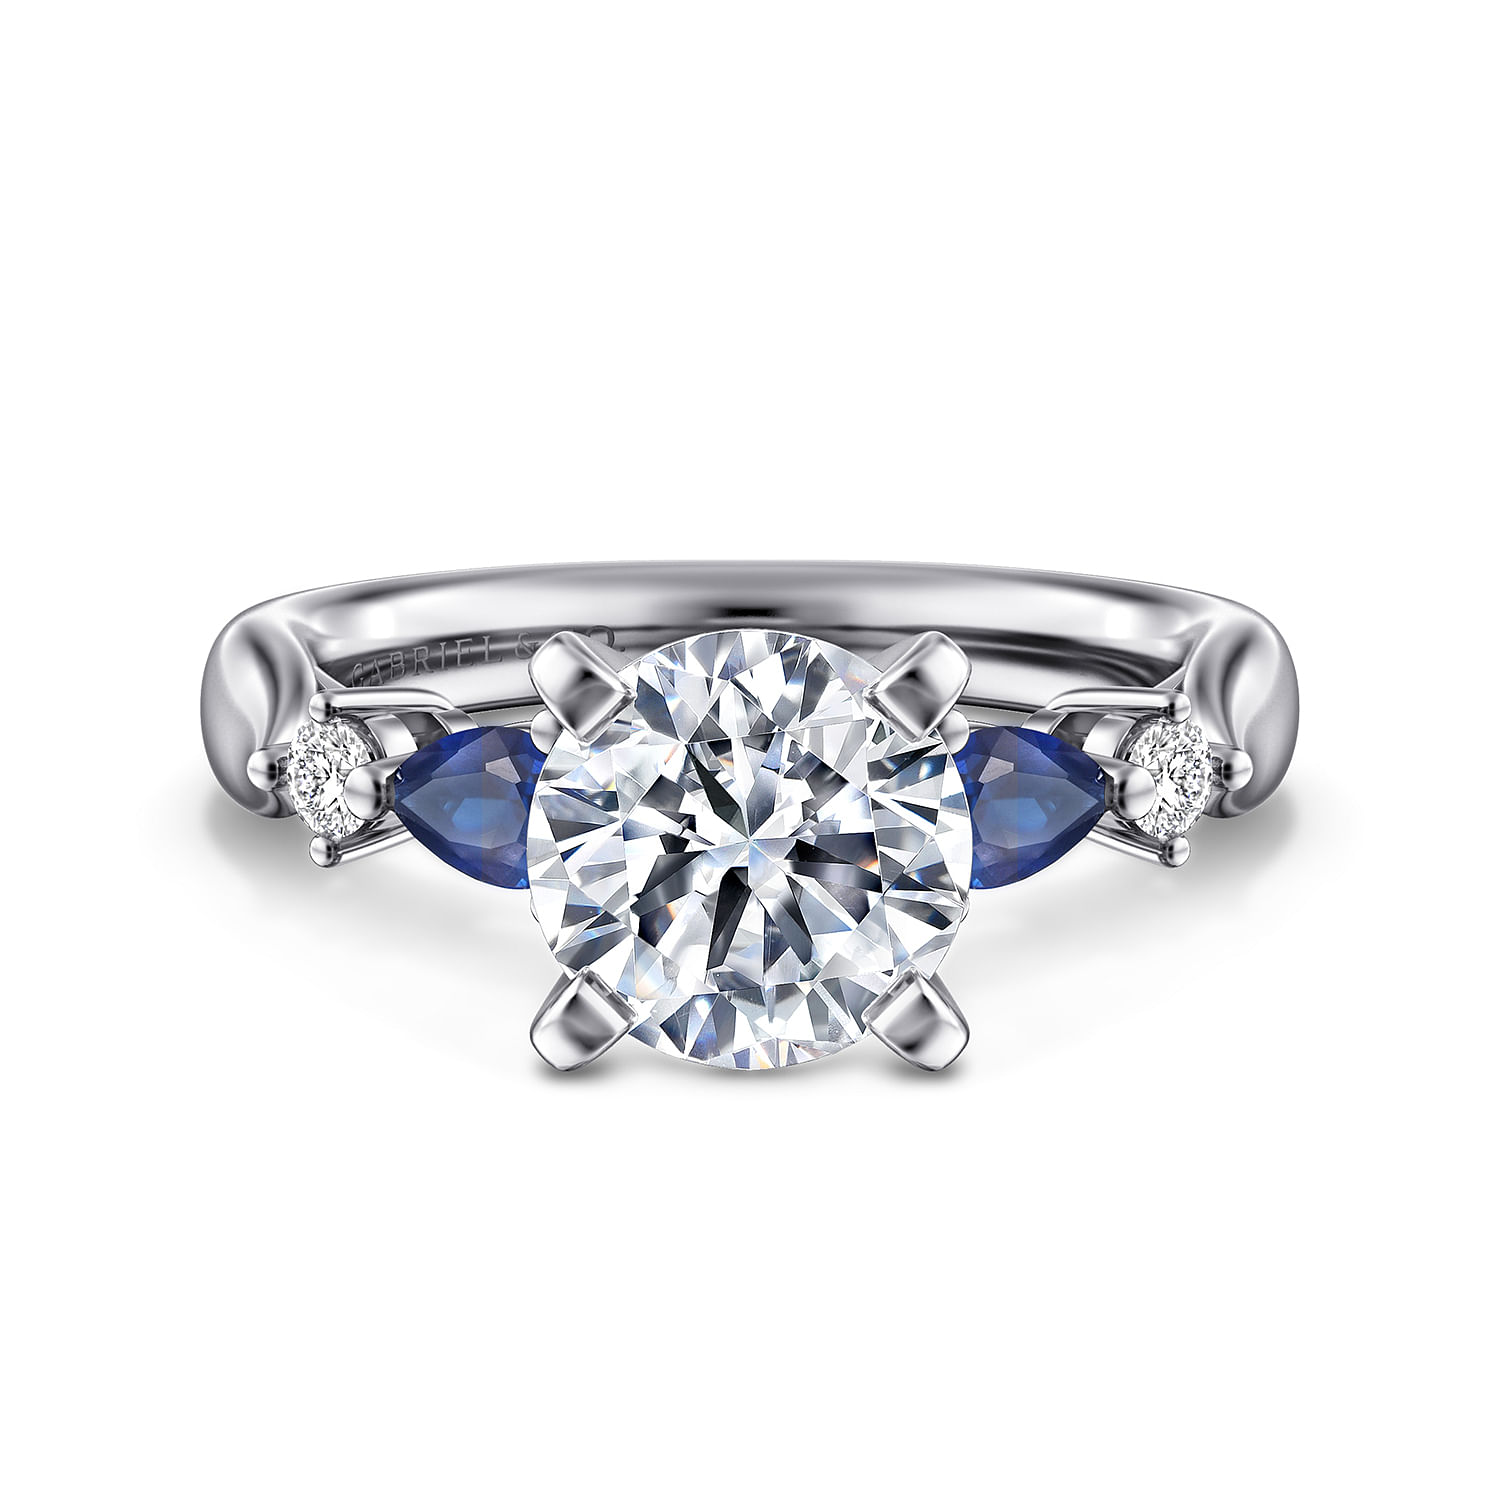 Carrie---14K-White-Gold-Round-Five-Stone-Sapphire-and-Diamond-Engagement-Ring1